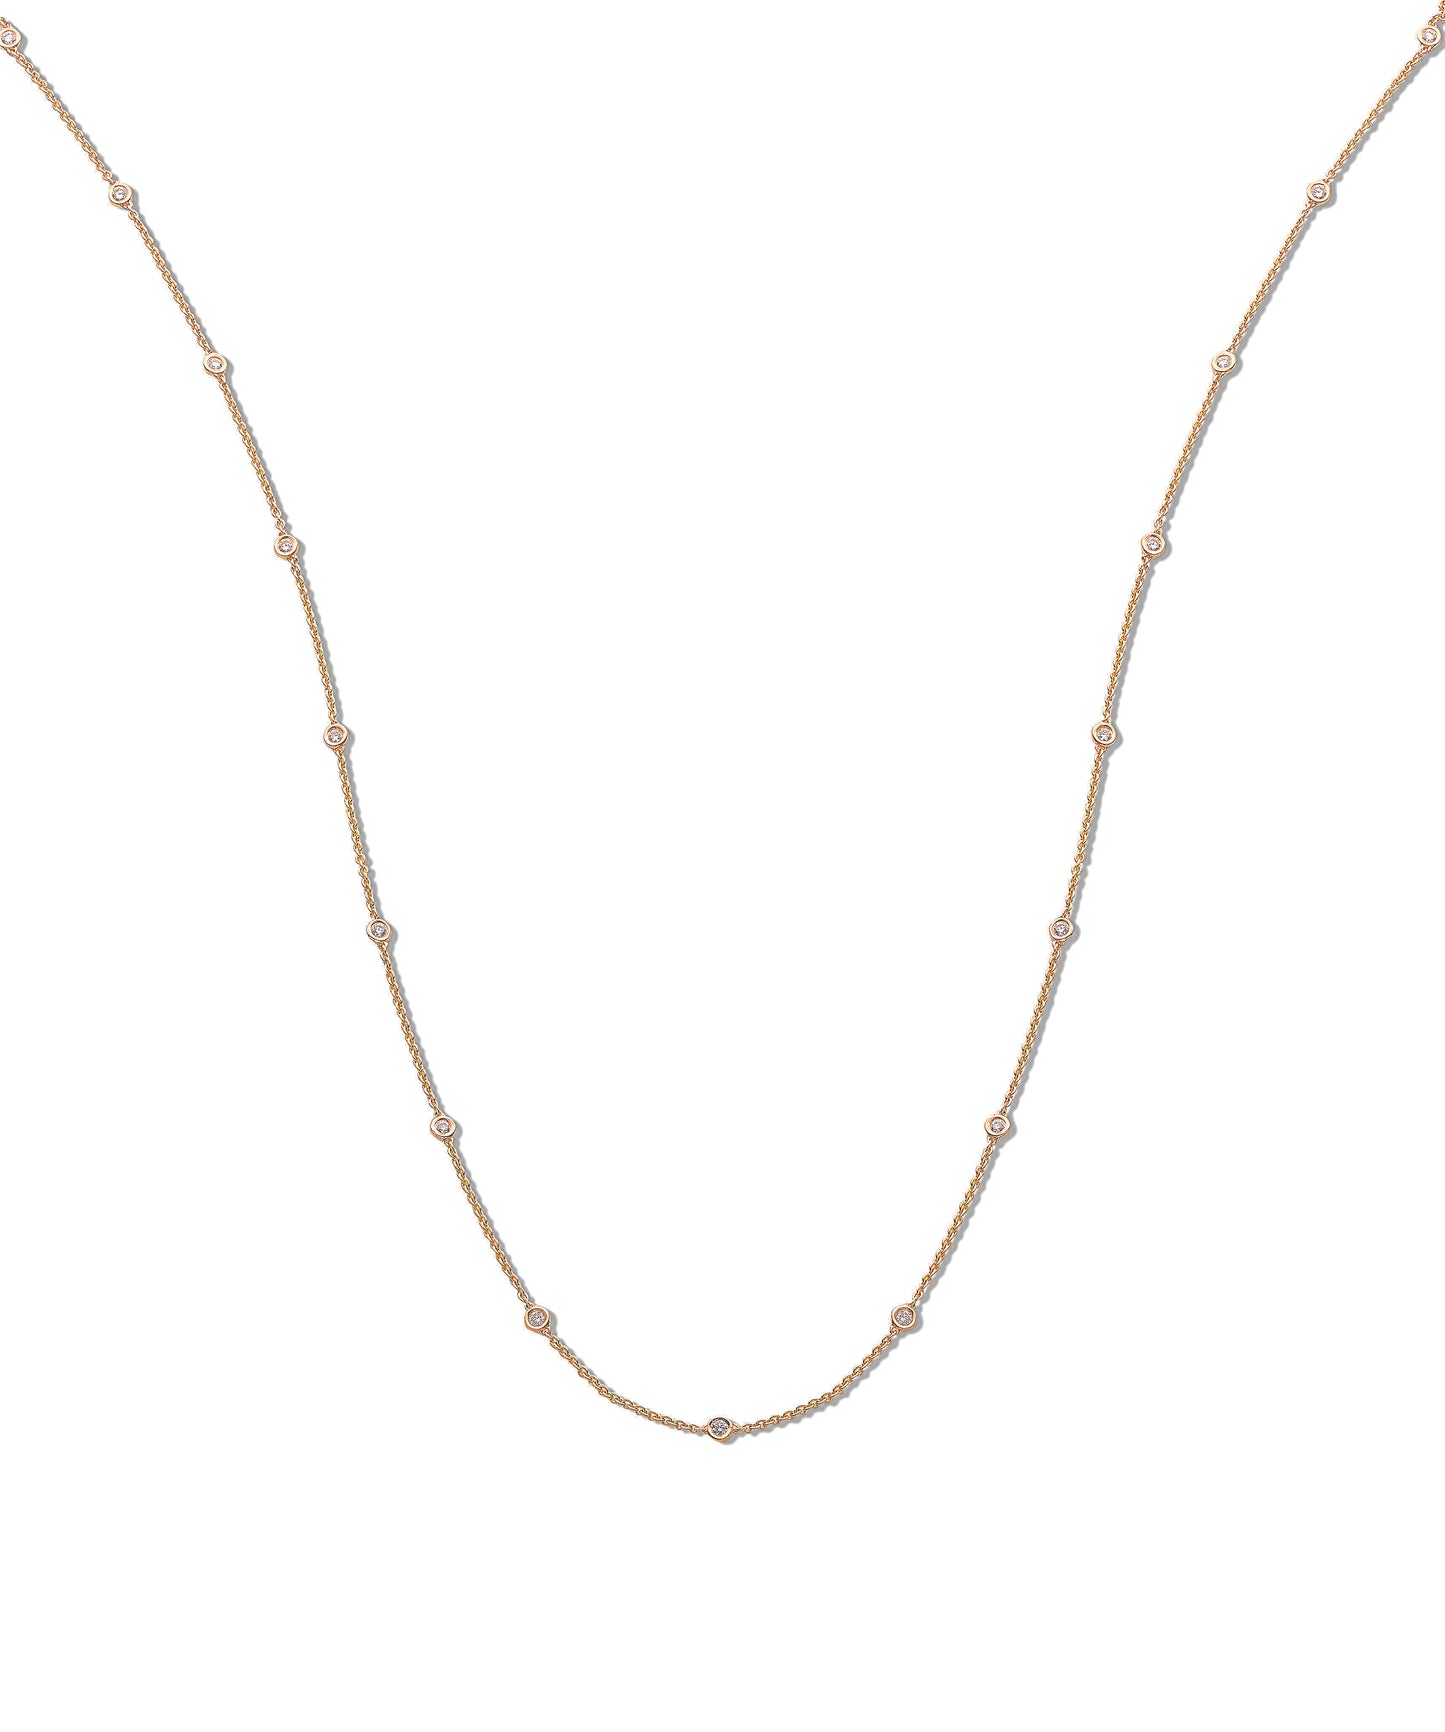 18ct Gold 1.00ct Diamond by the yard Necklace (36in/91cm)